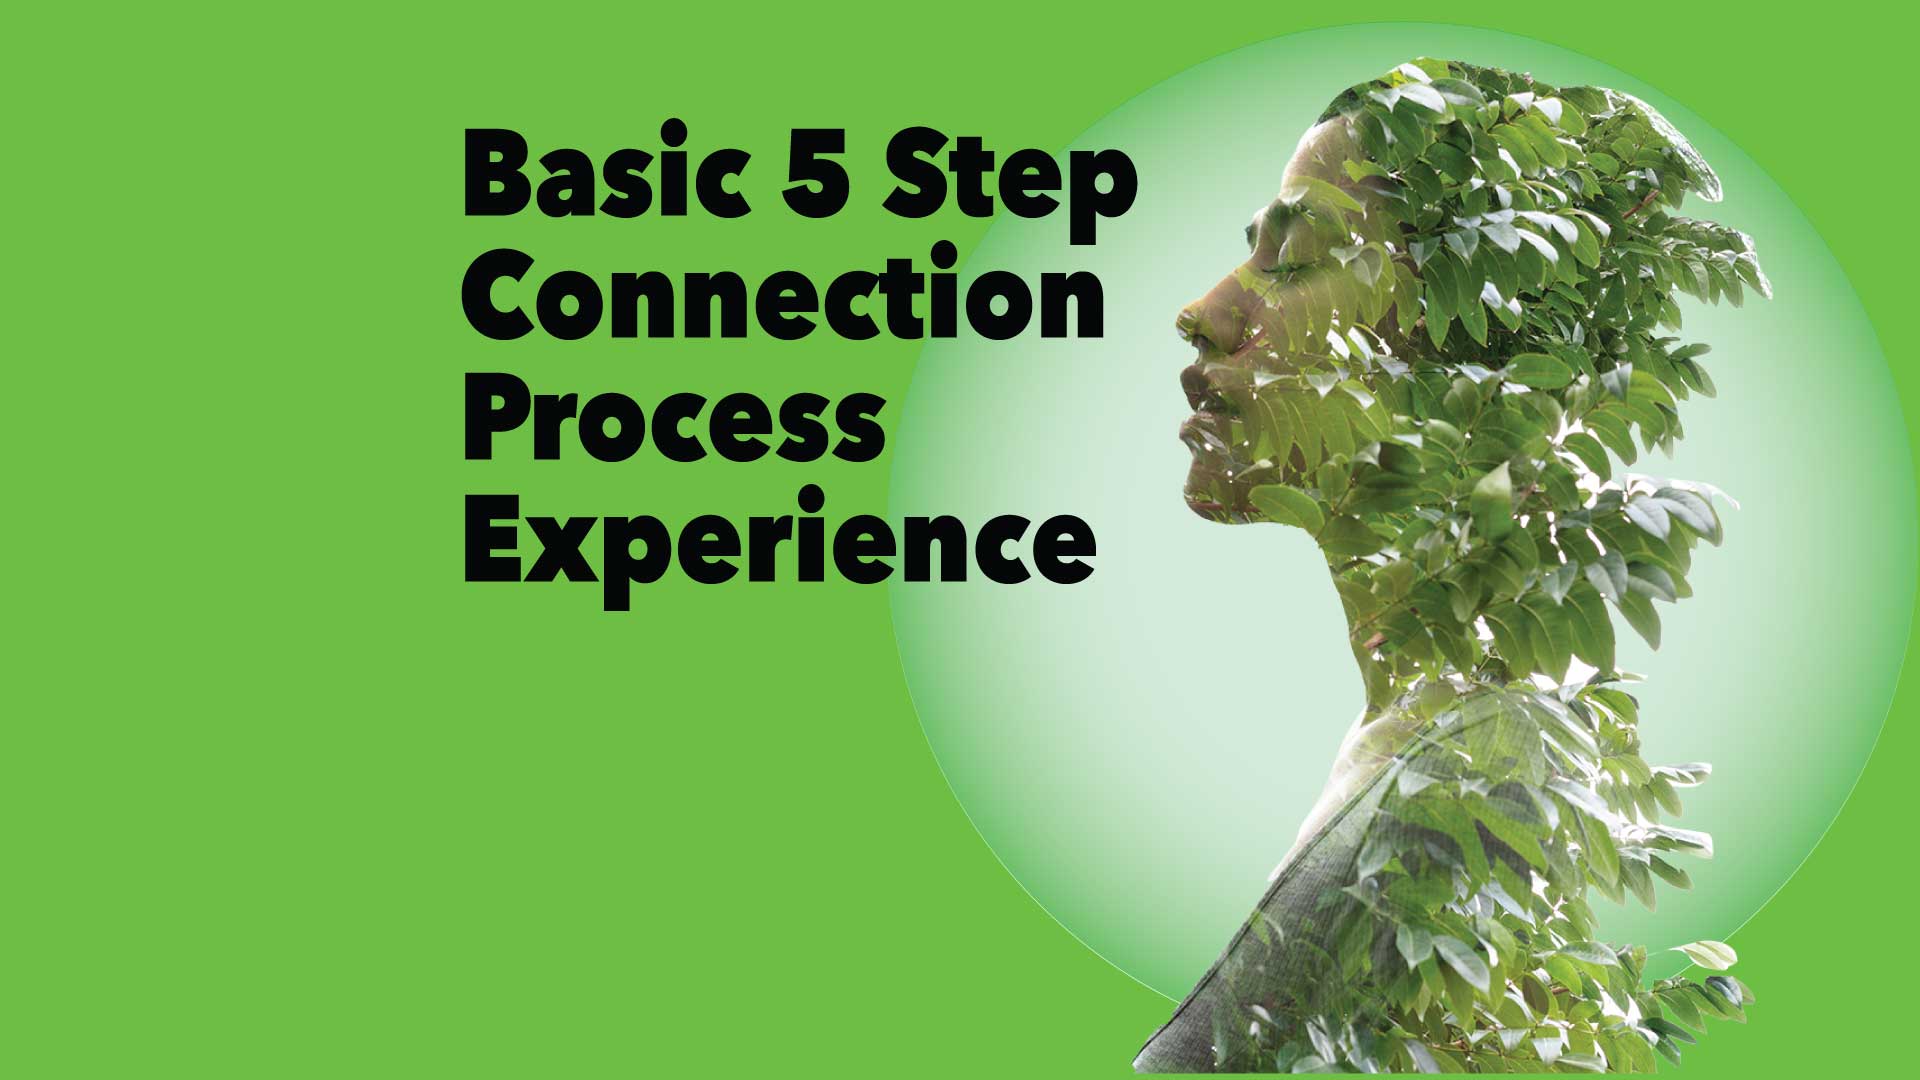 The Basic  5 Step  Connection Process Experience